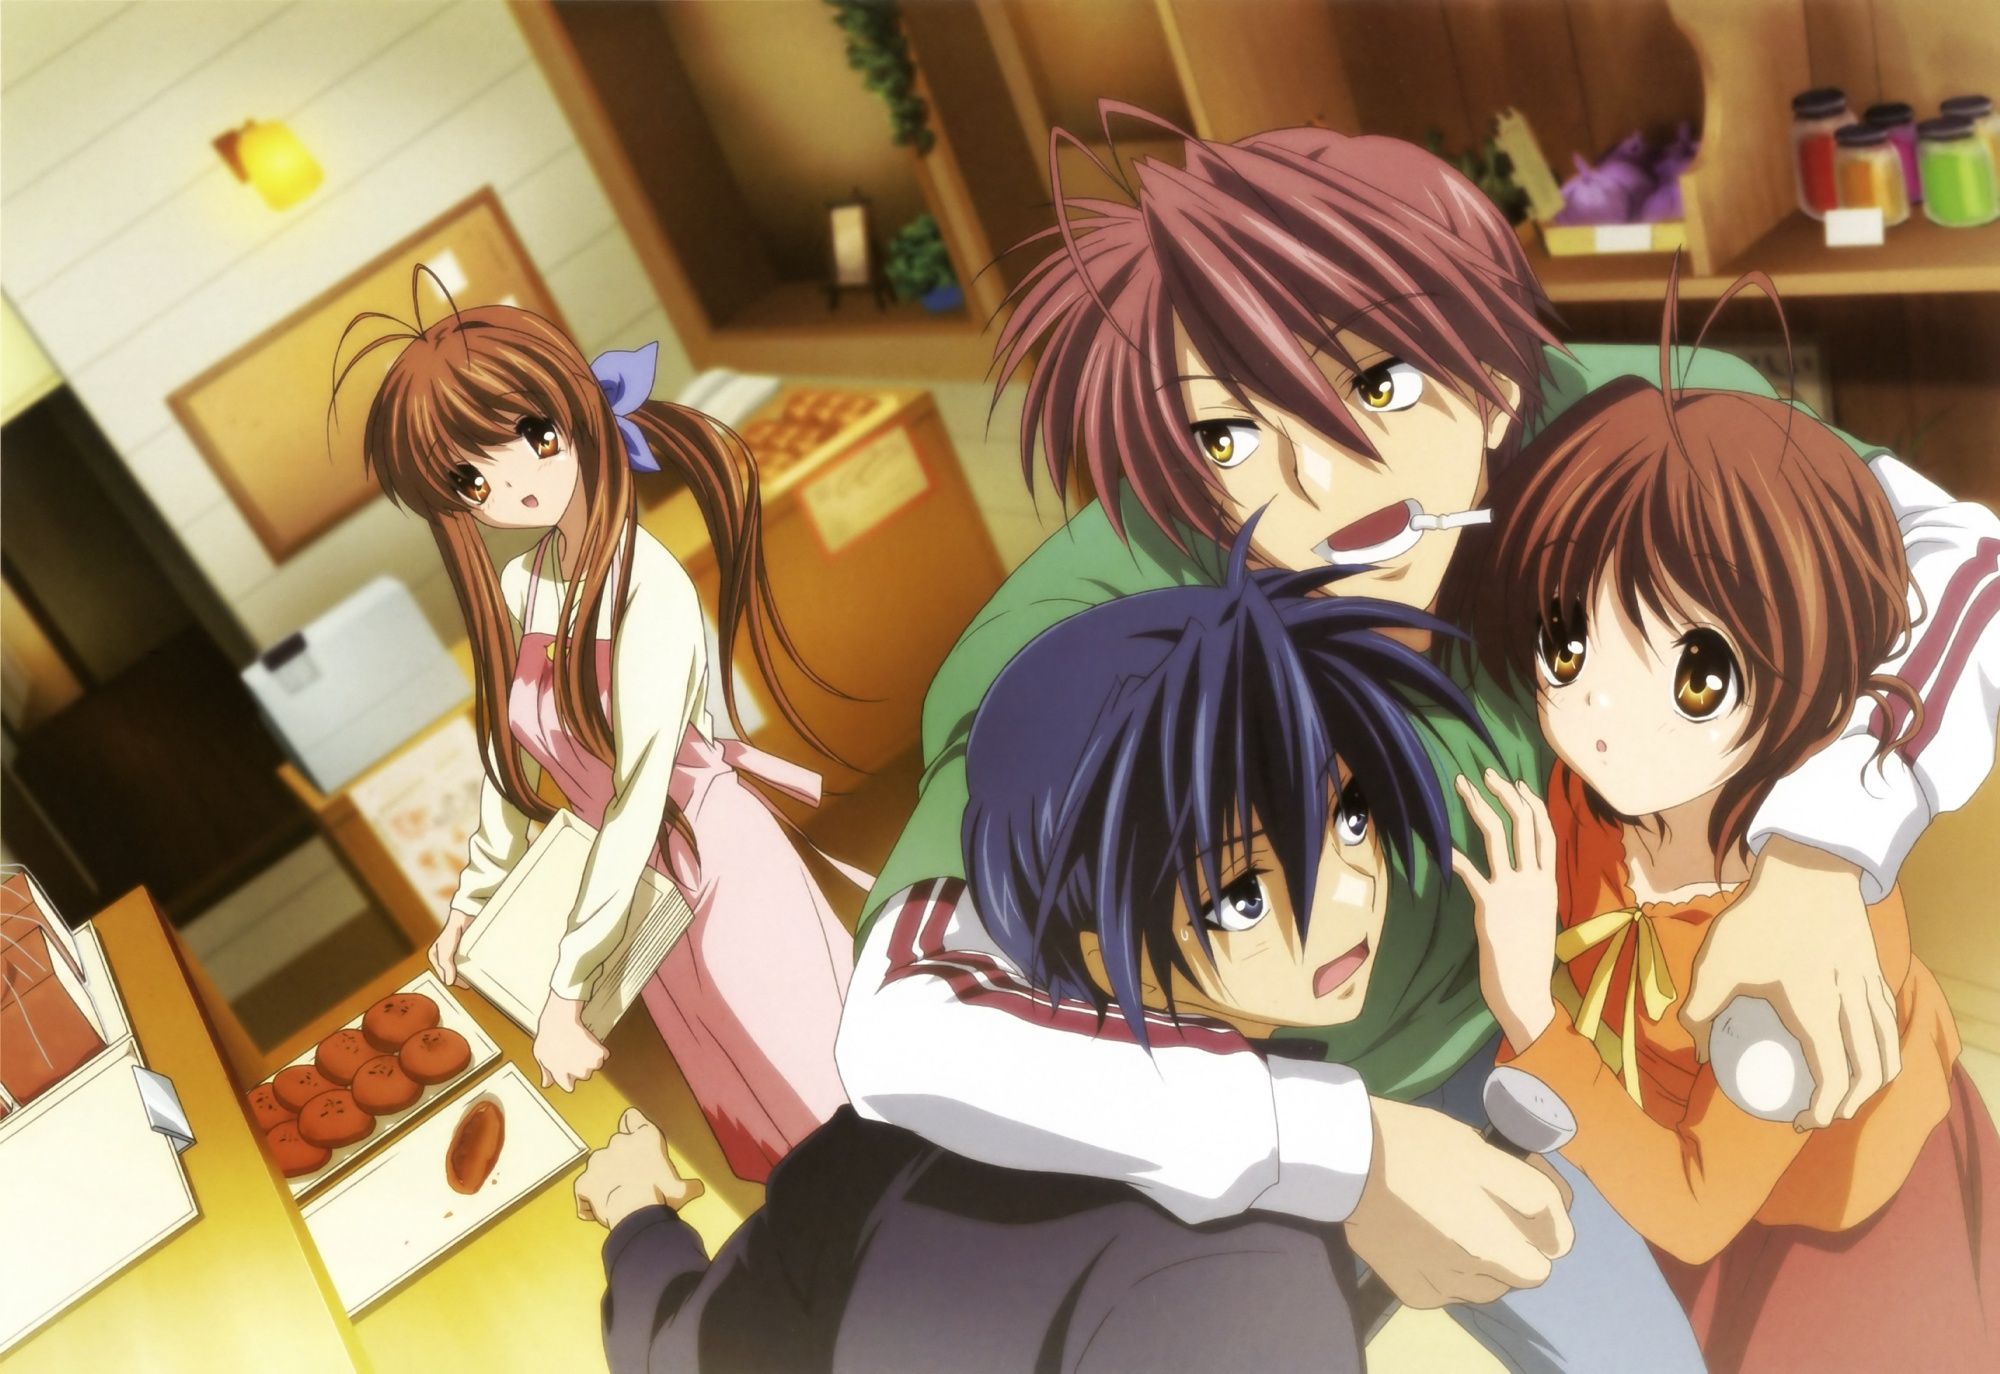 HD clannad characters wallpapers